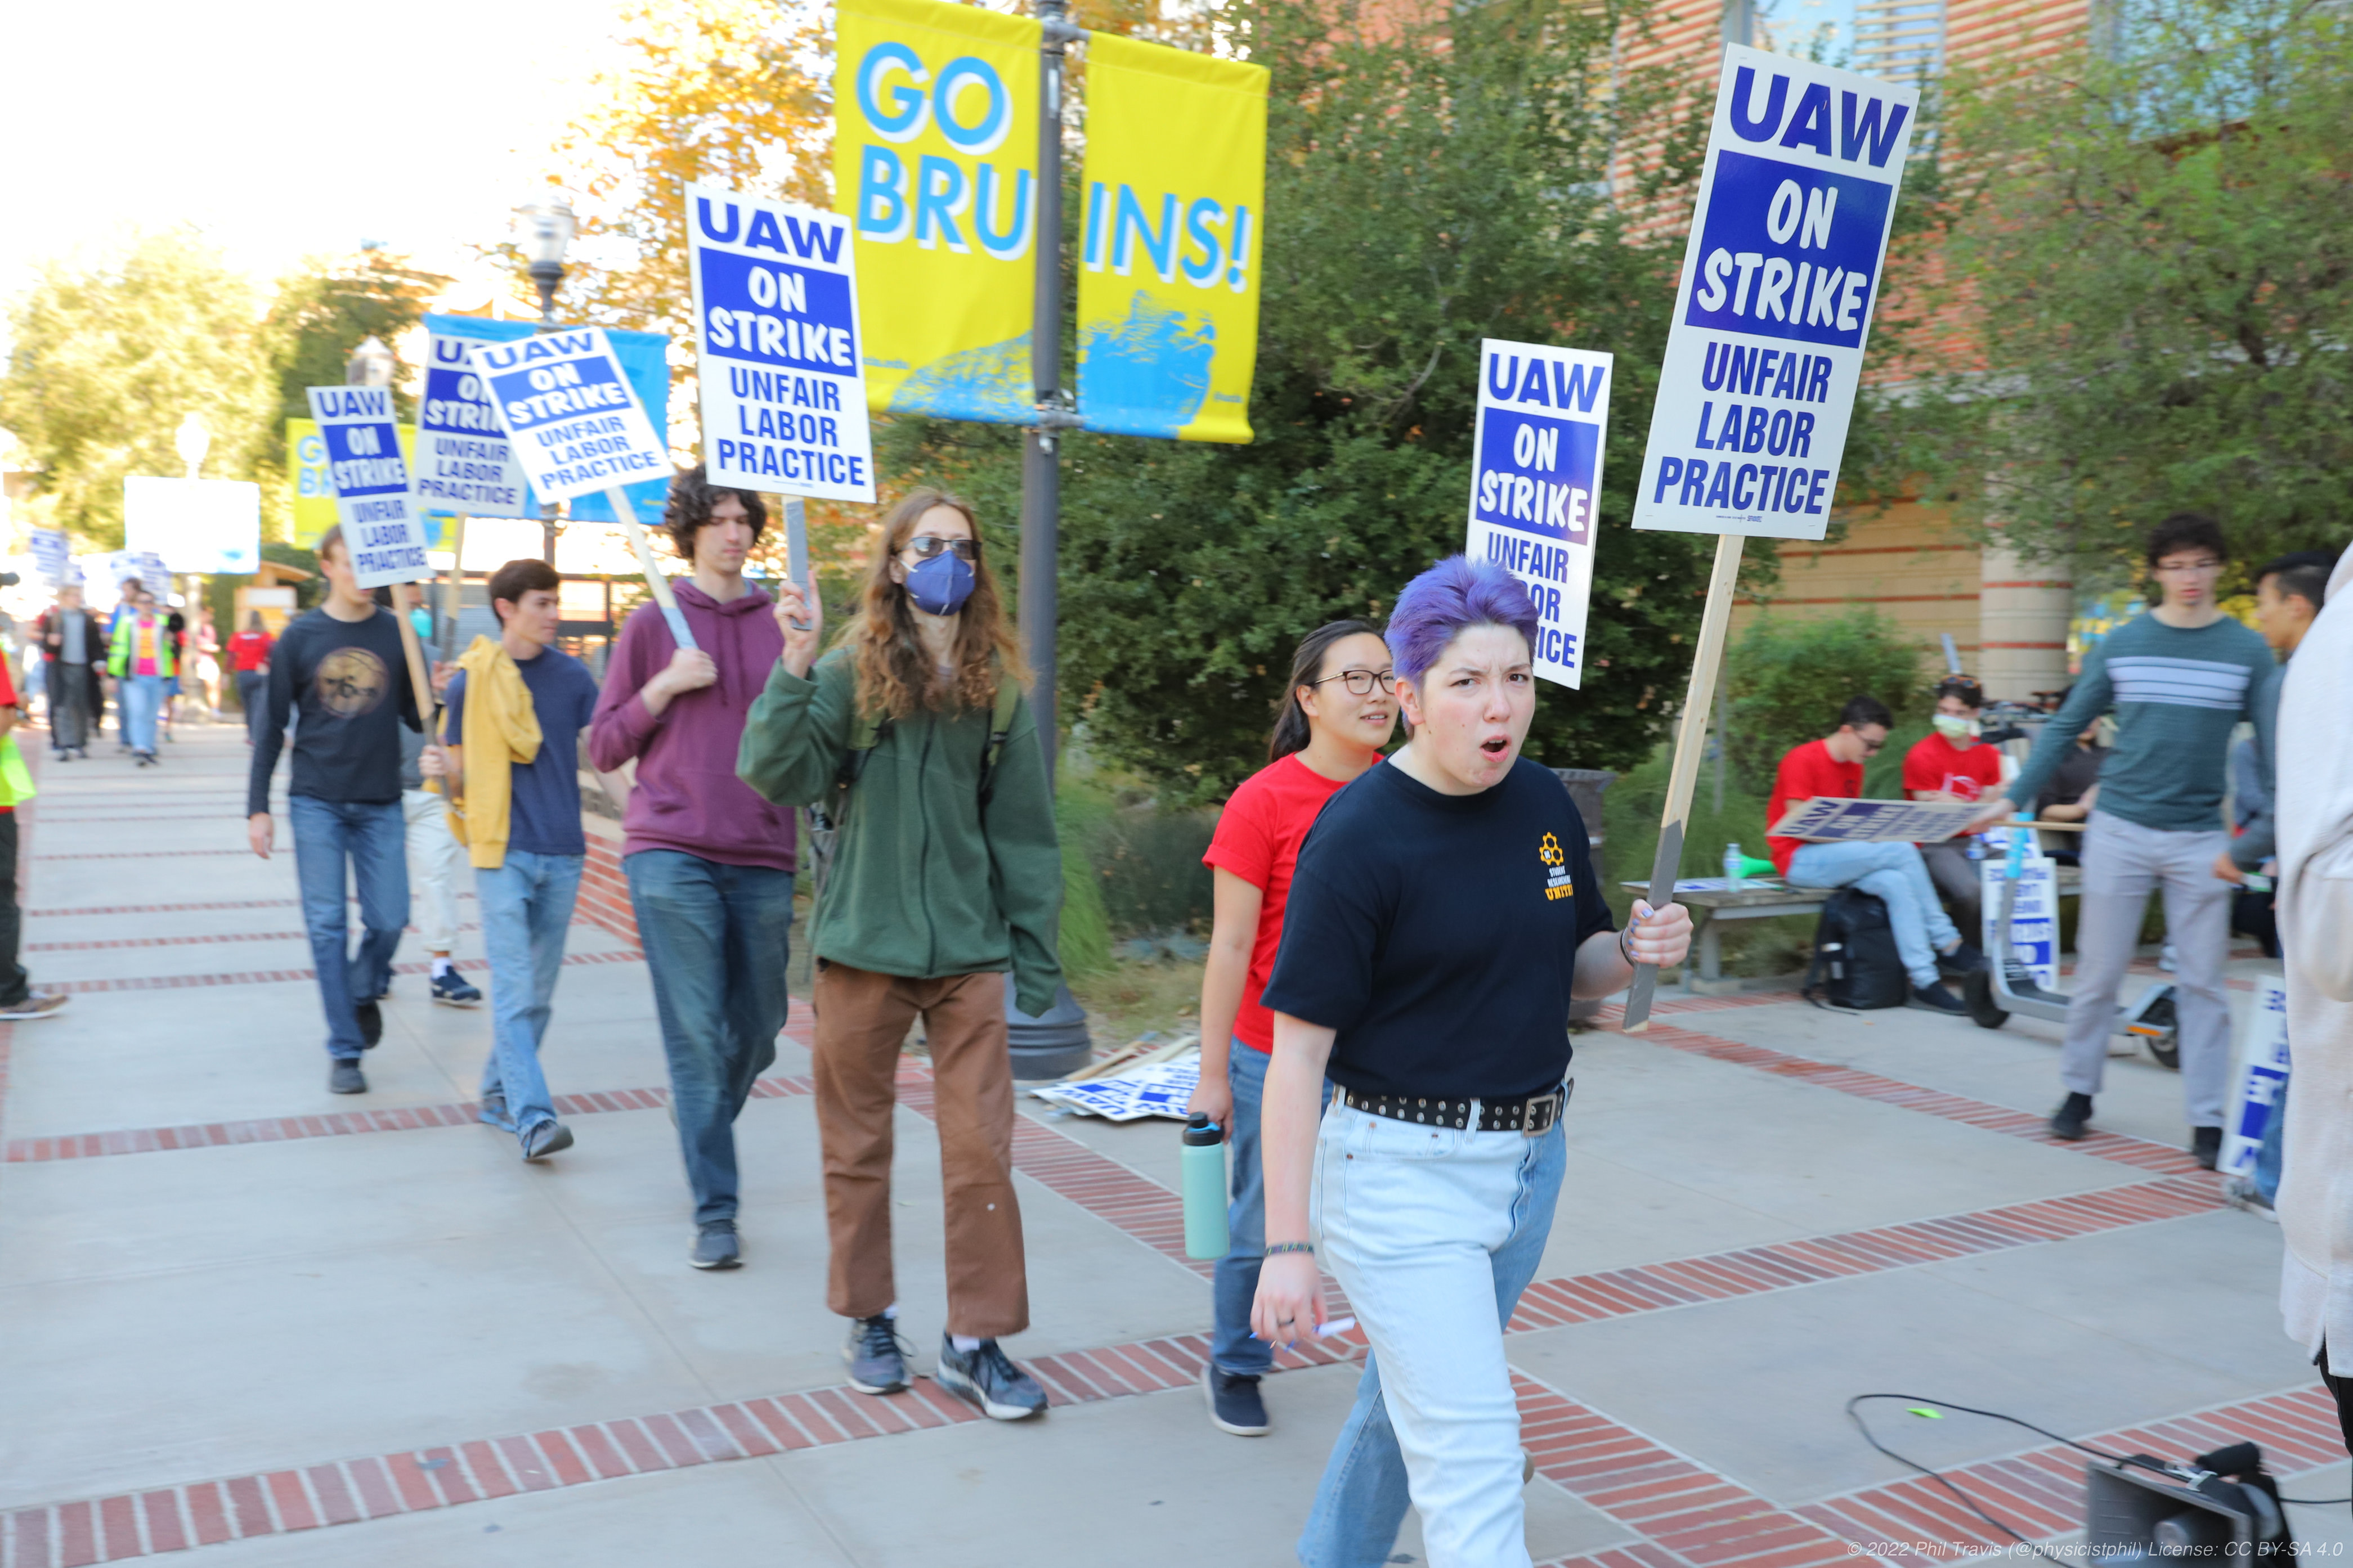 Strikers from physical sciences on the picket lines at UCLA. Leading the line is Veronica Dike, an astronomy graduate student at UCLA.